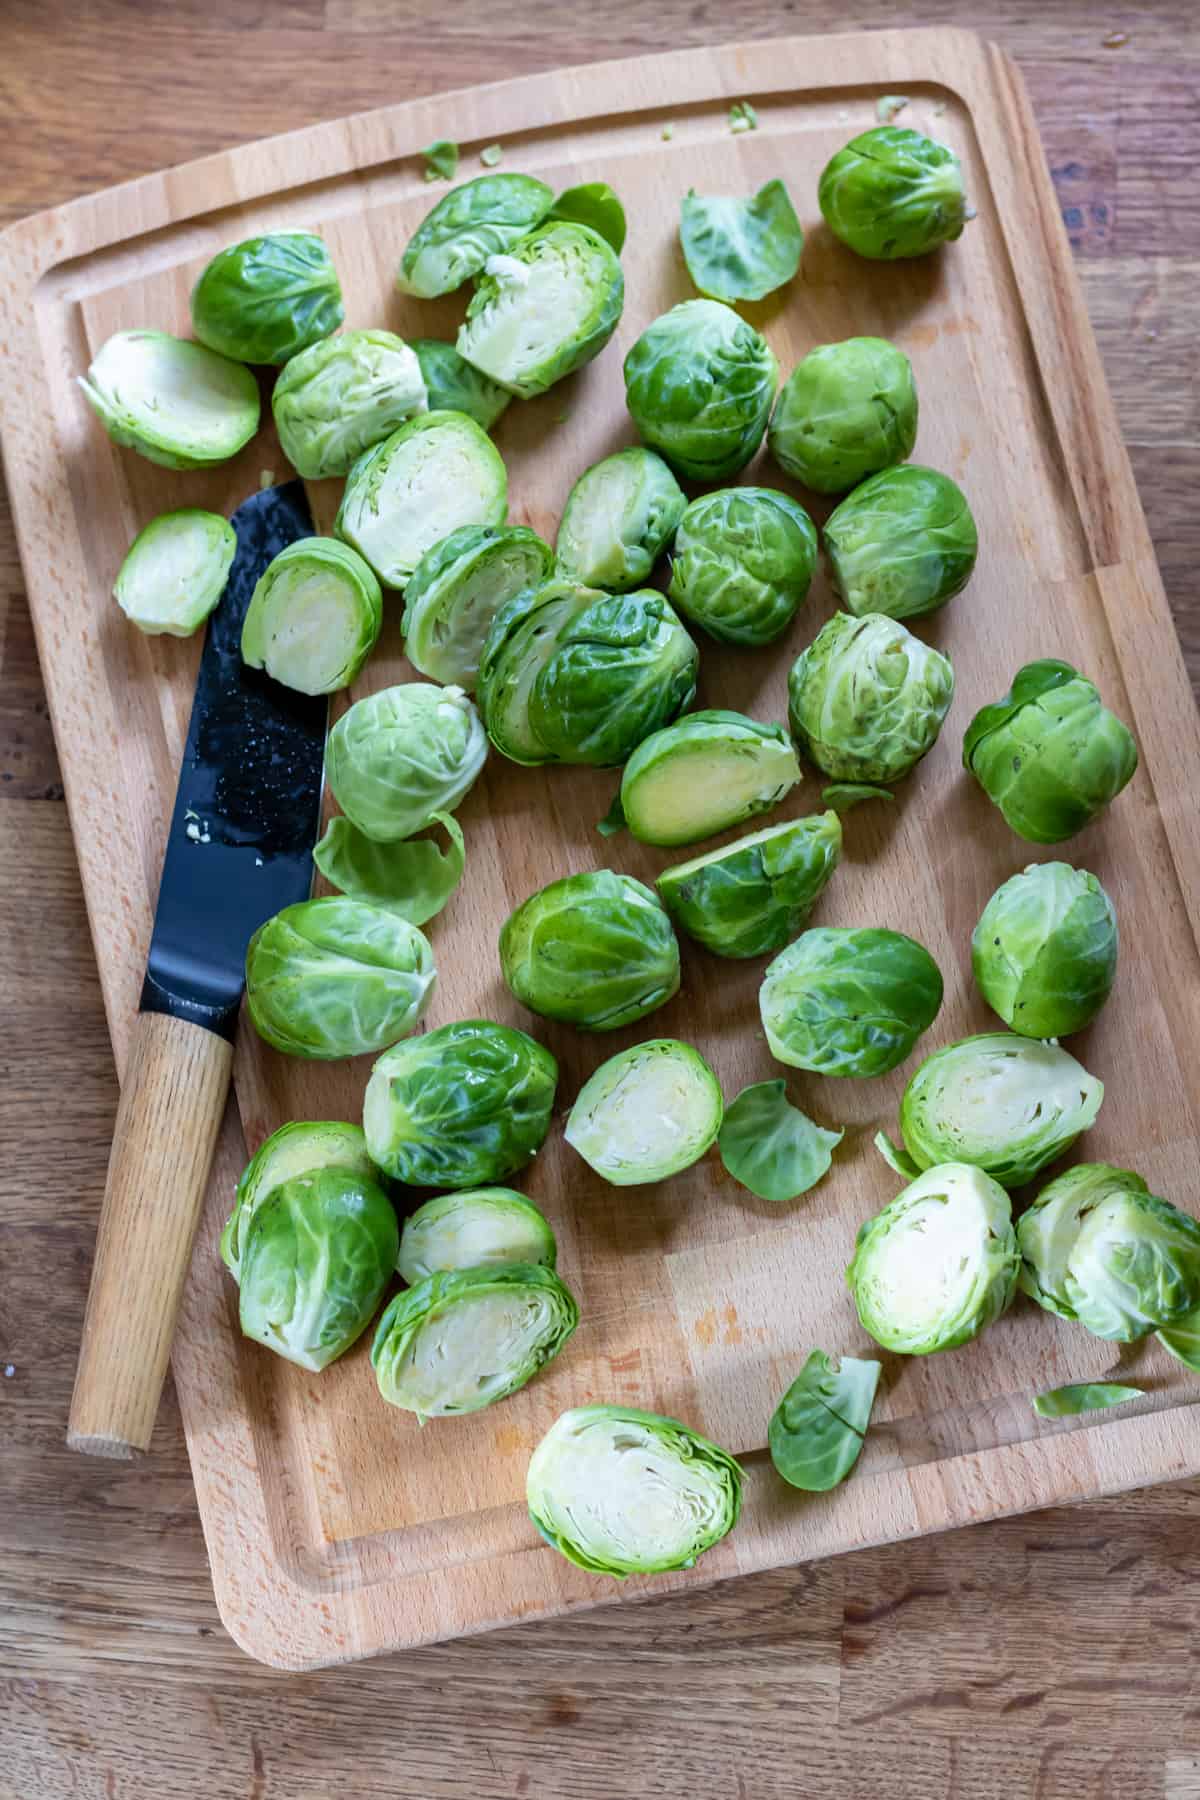 Trimming brussels sprouts.